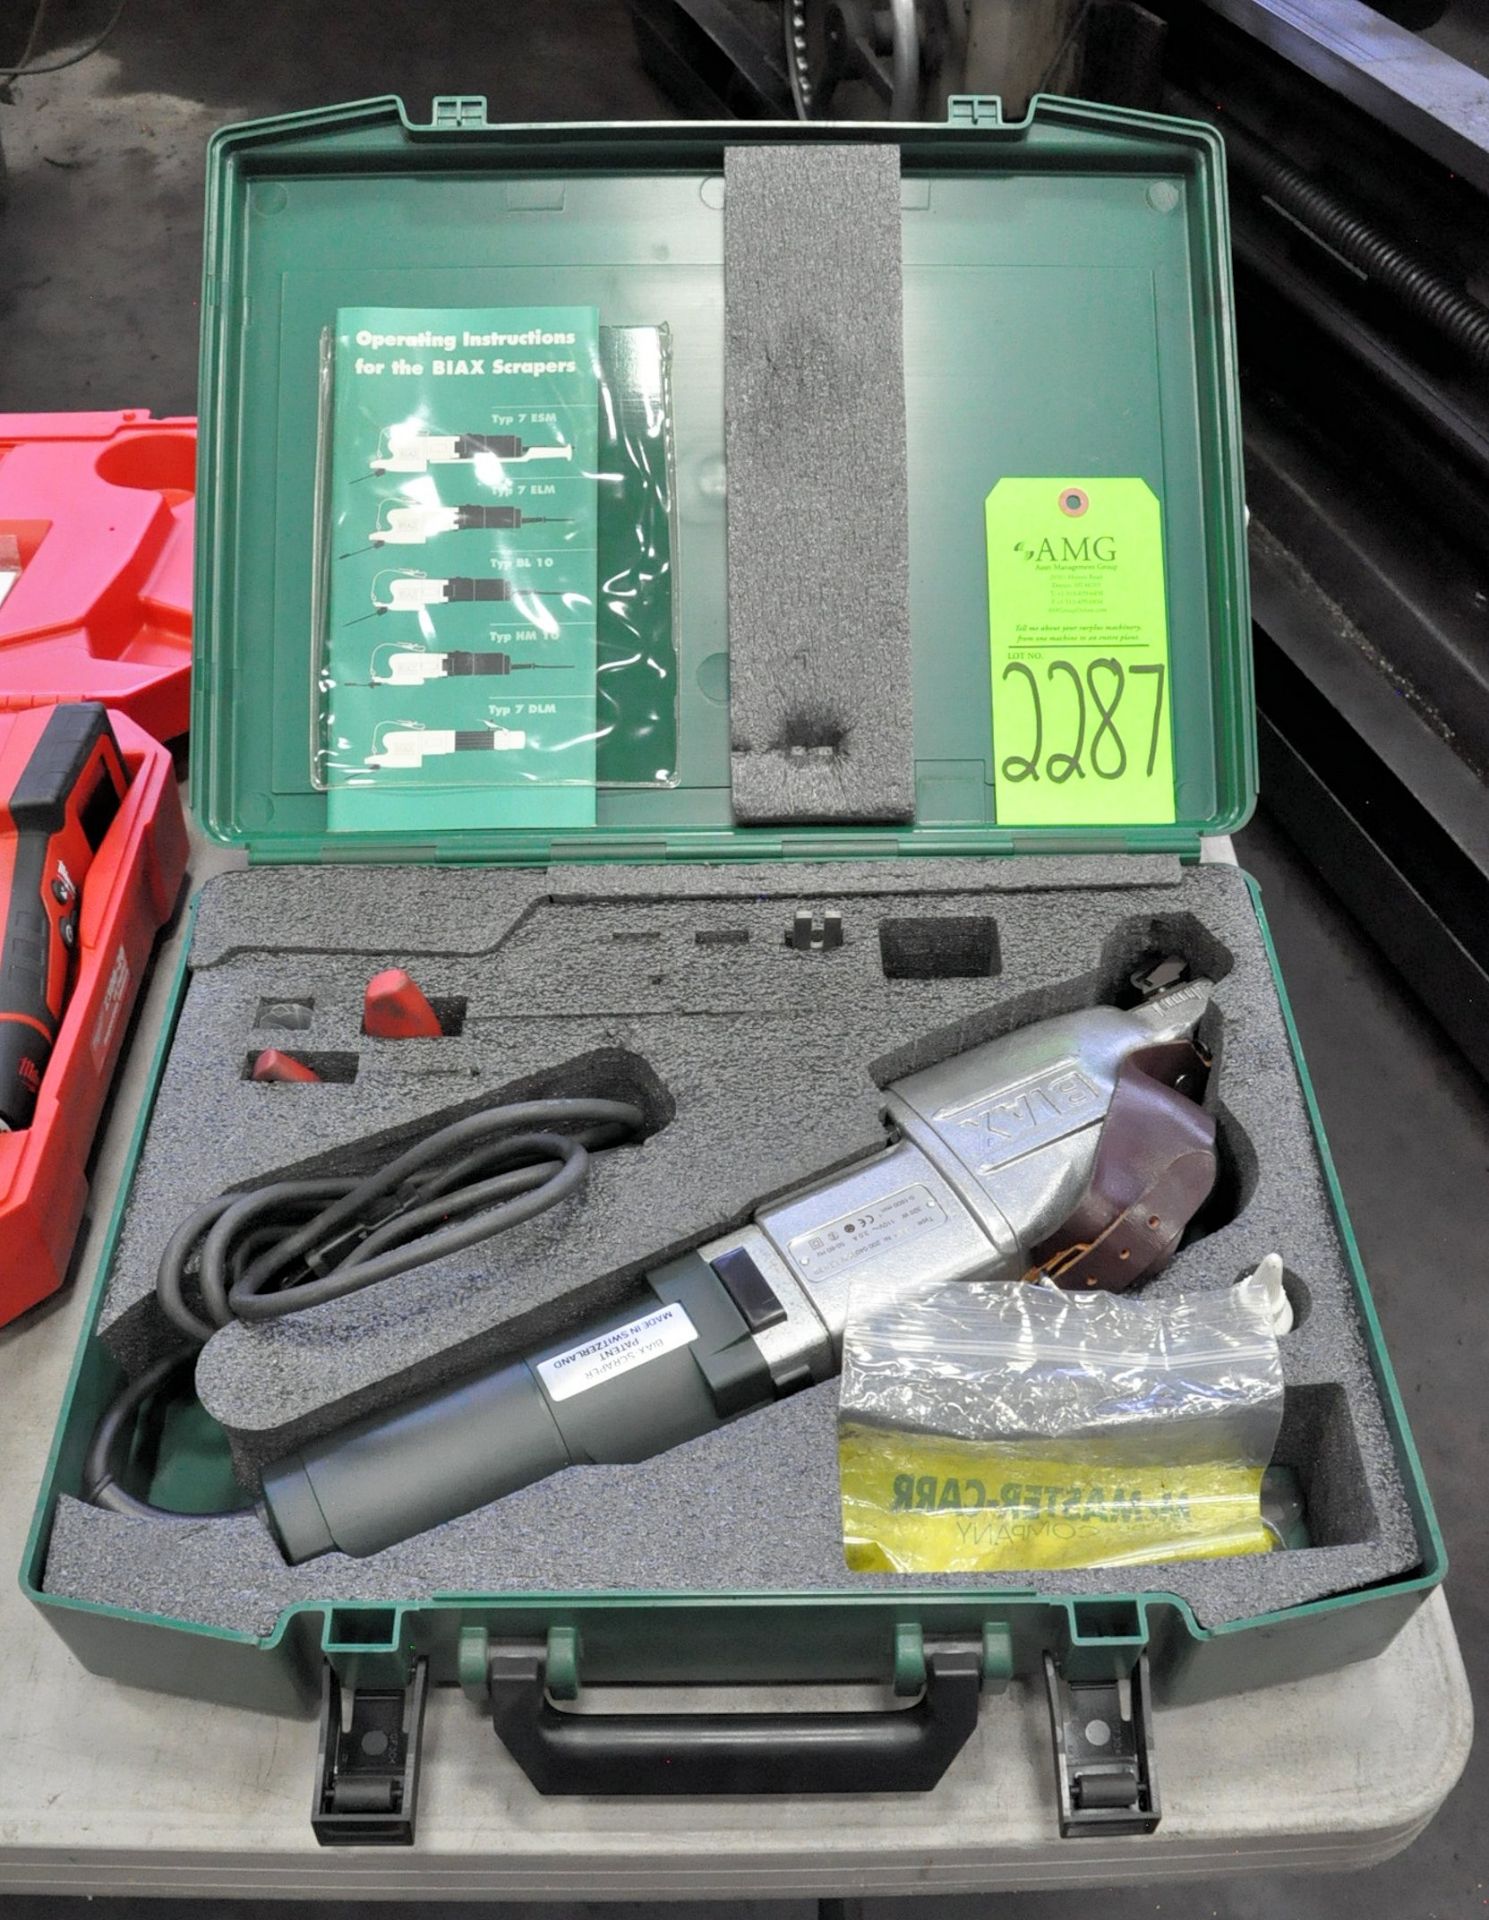 Biax Type 7ELM, Electric Hand Held Scraper with Case, (Tool Room), (Green Tag)